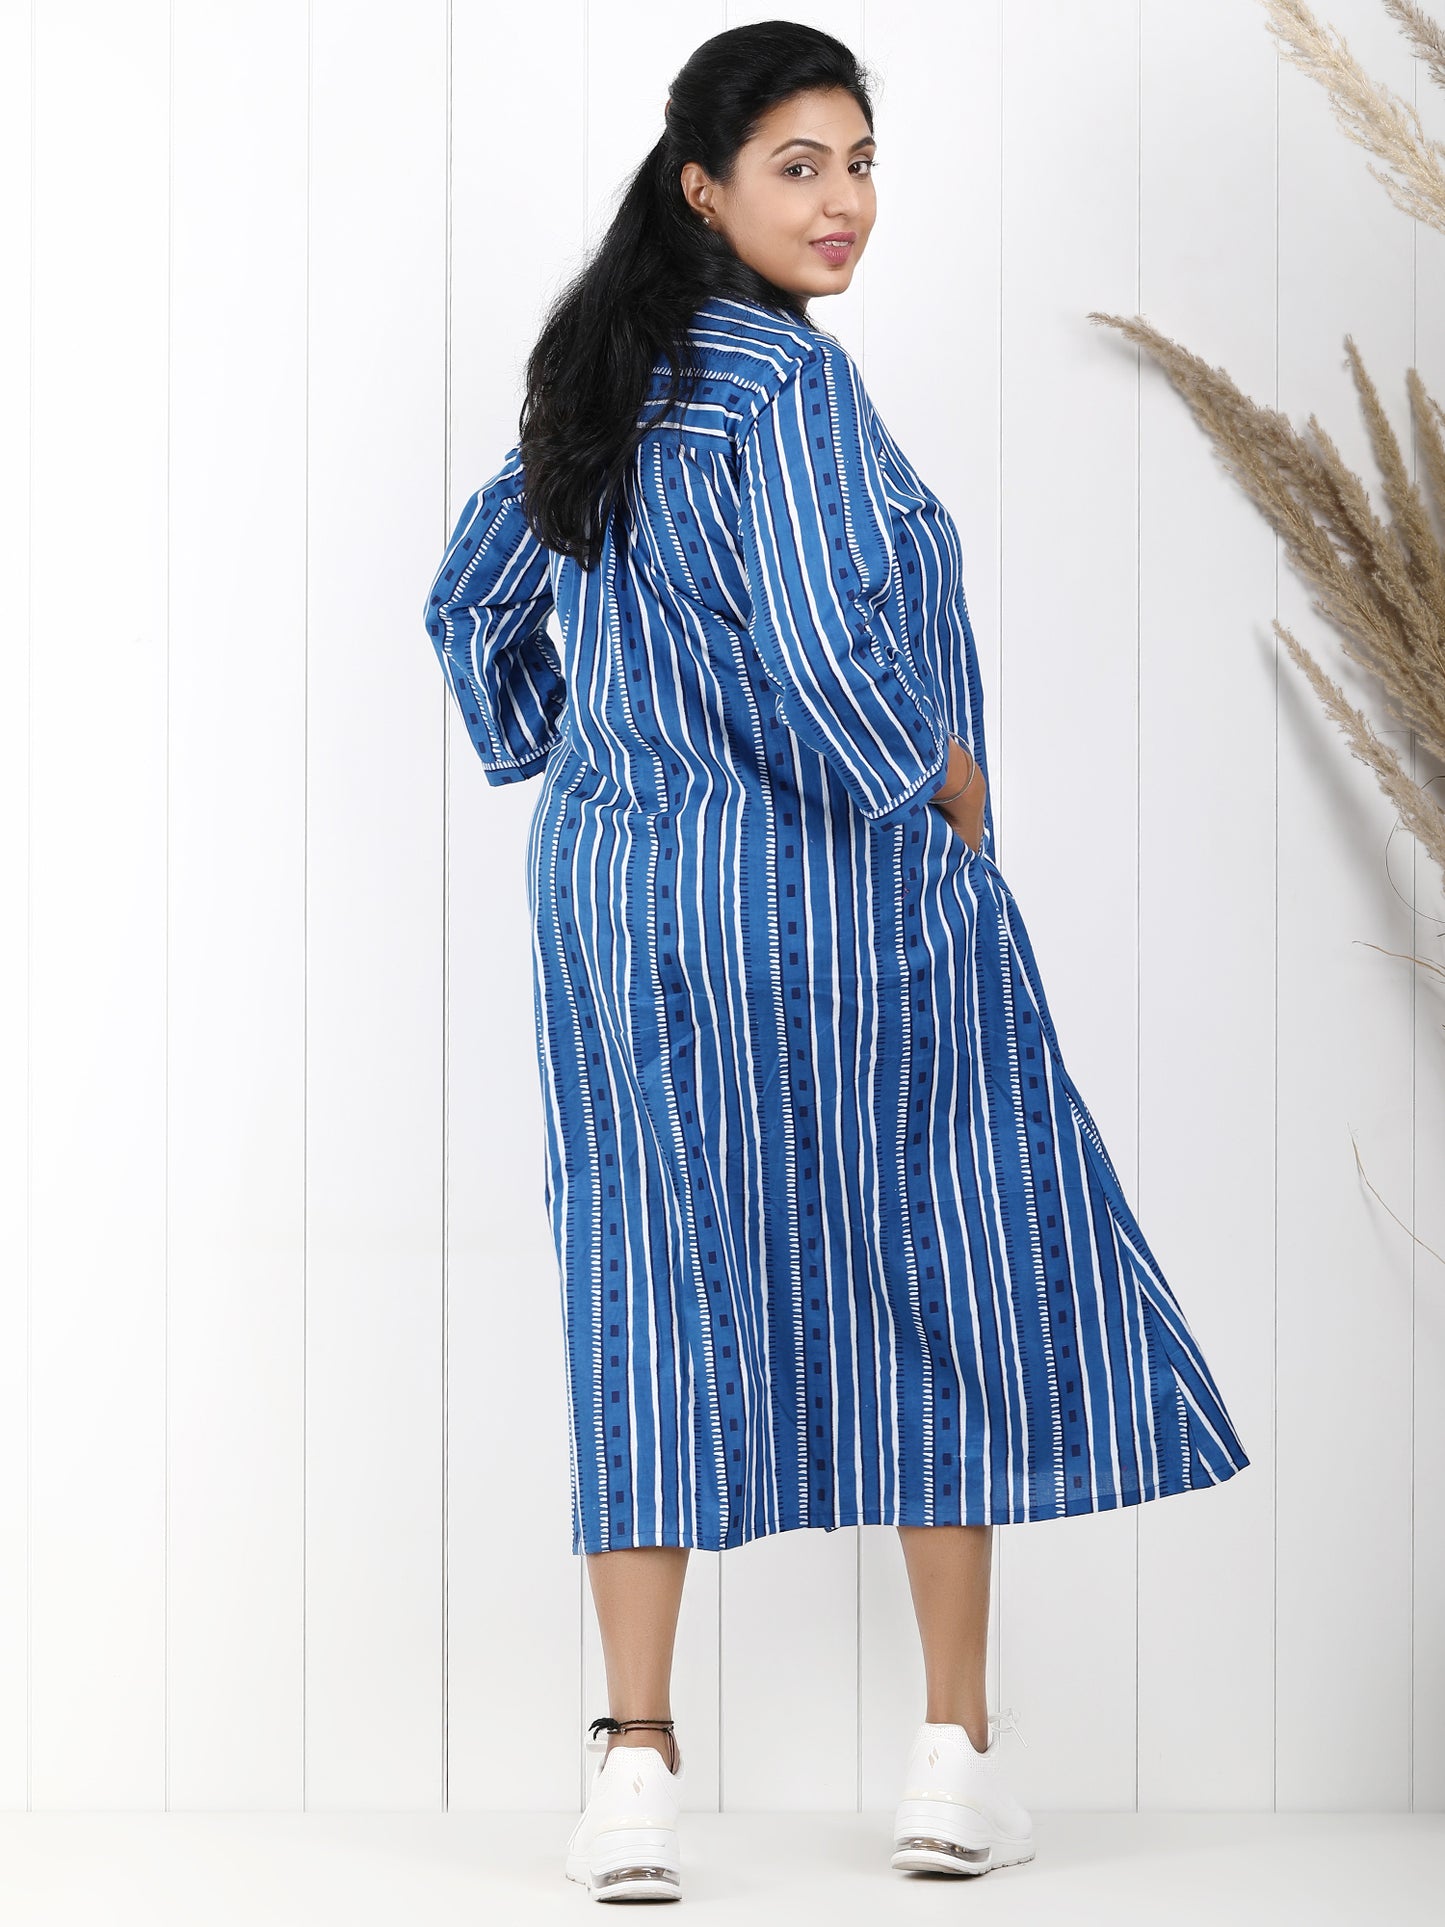 Cotton striped dress in blue color for women